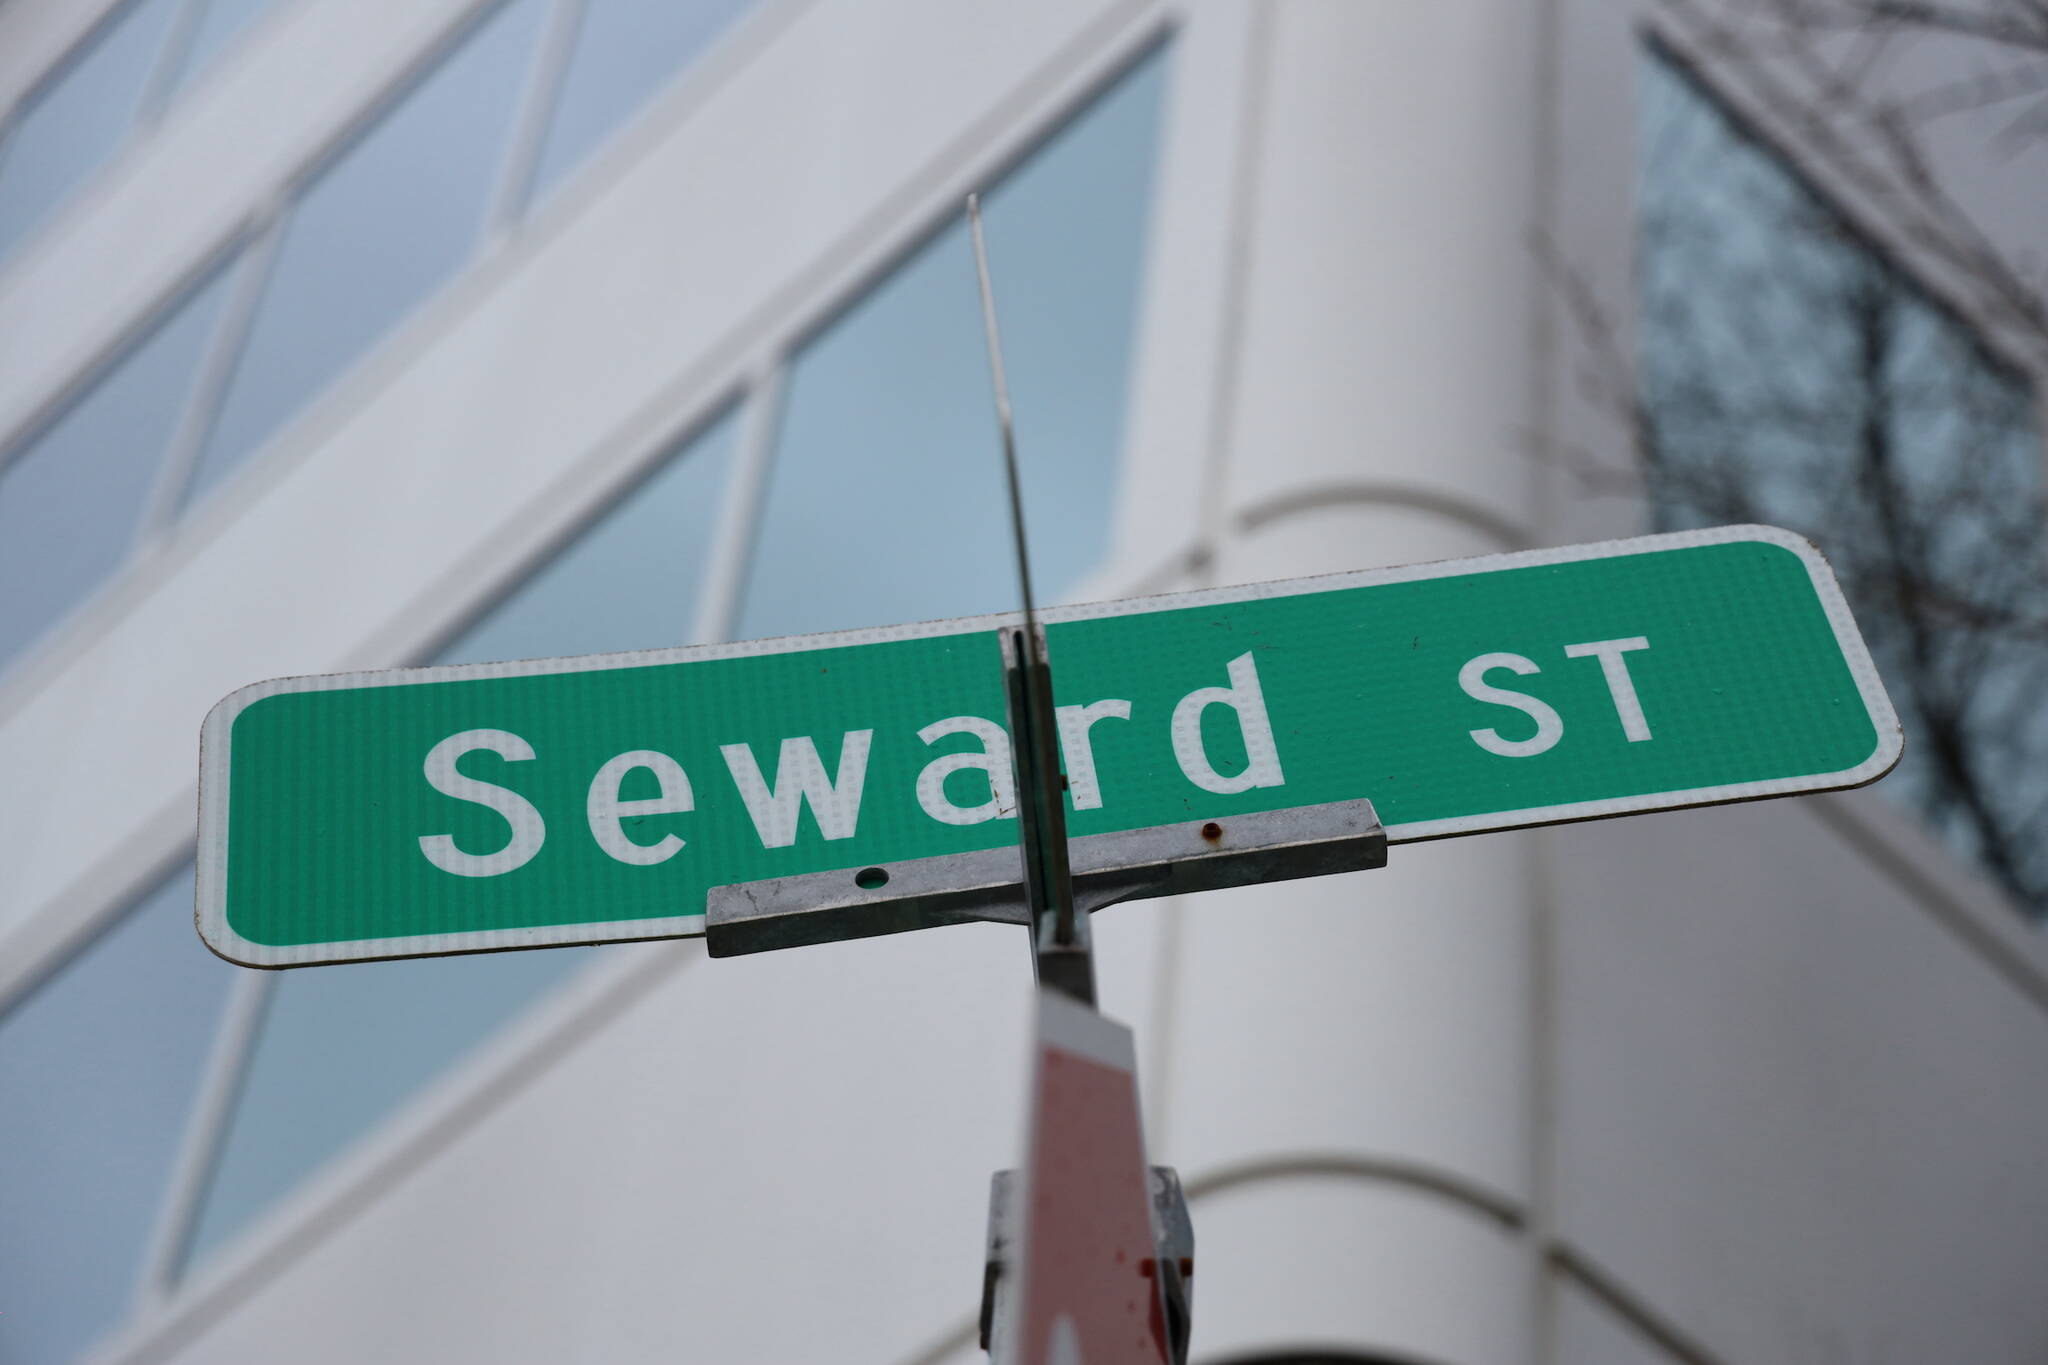 The Seward Street sign sits in front of the Sealaska Corporation near the downtown cruise ship docks. The street could have its name changed to ‘Heritage Way’ in the near future, according to City and Borough of Juneau City Manager Rorie Watt. (Clarise Larson / Juneau Empire)